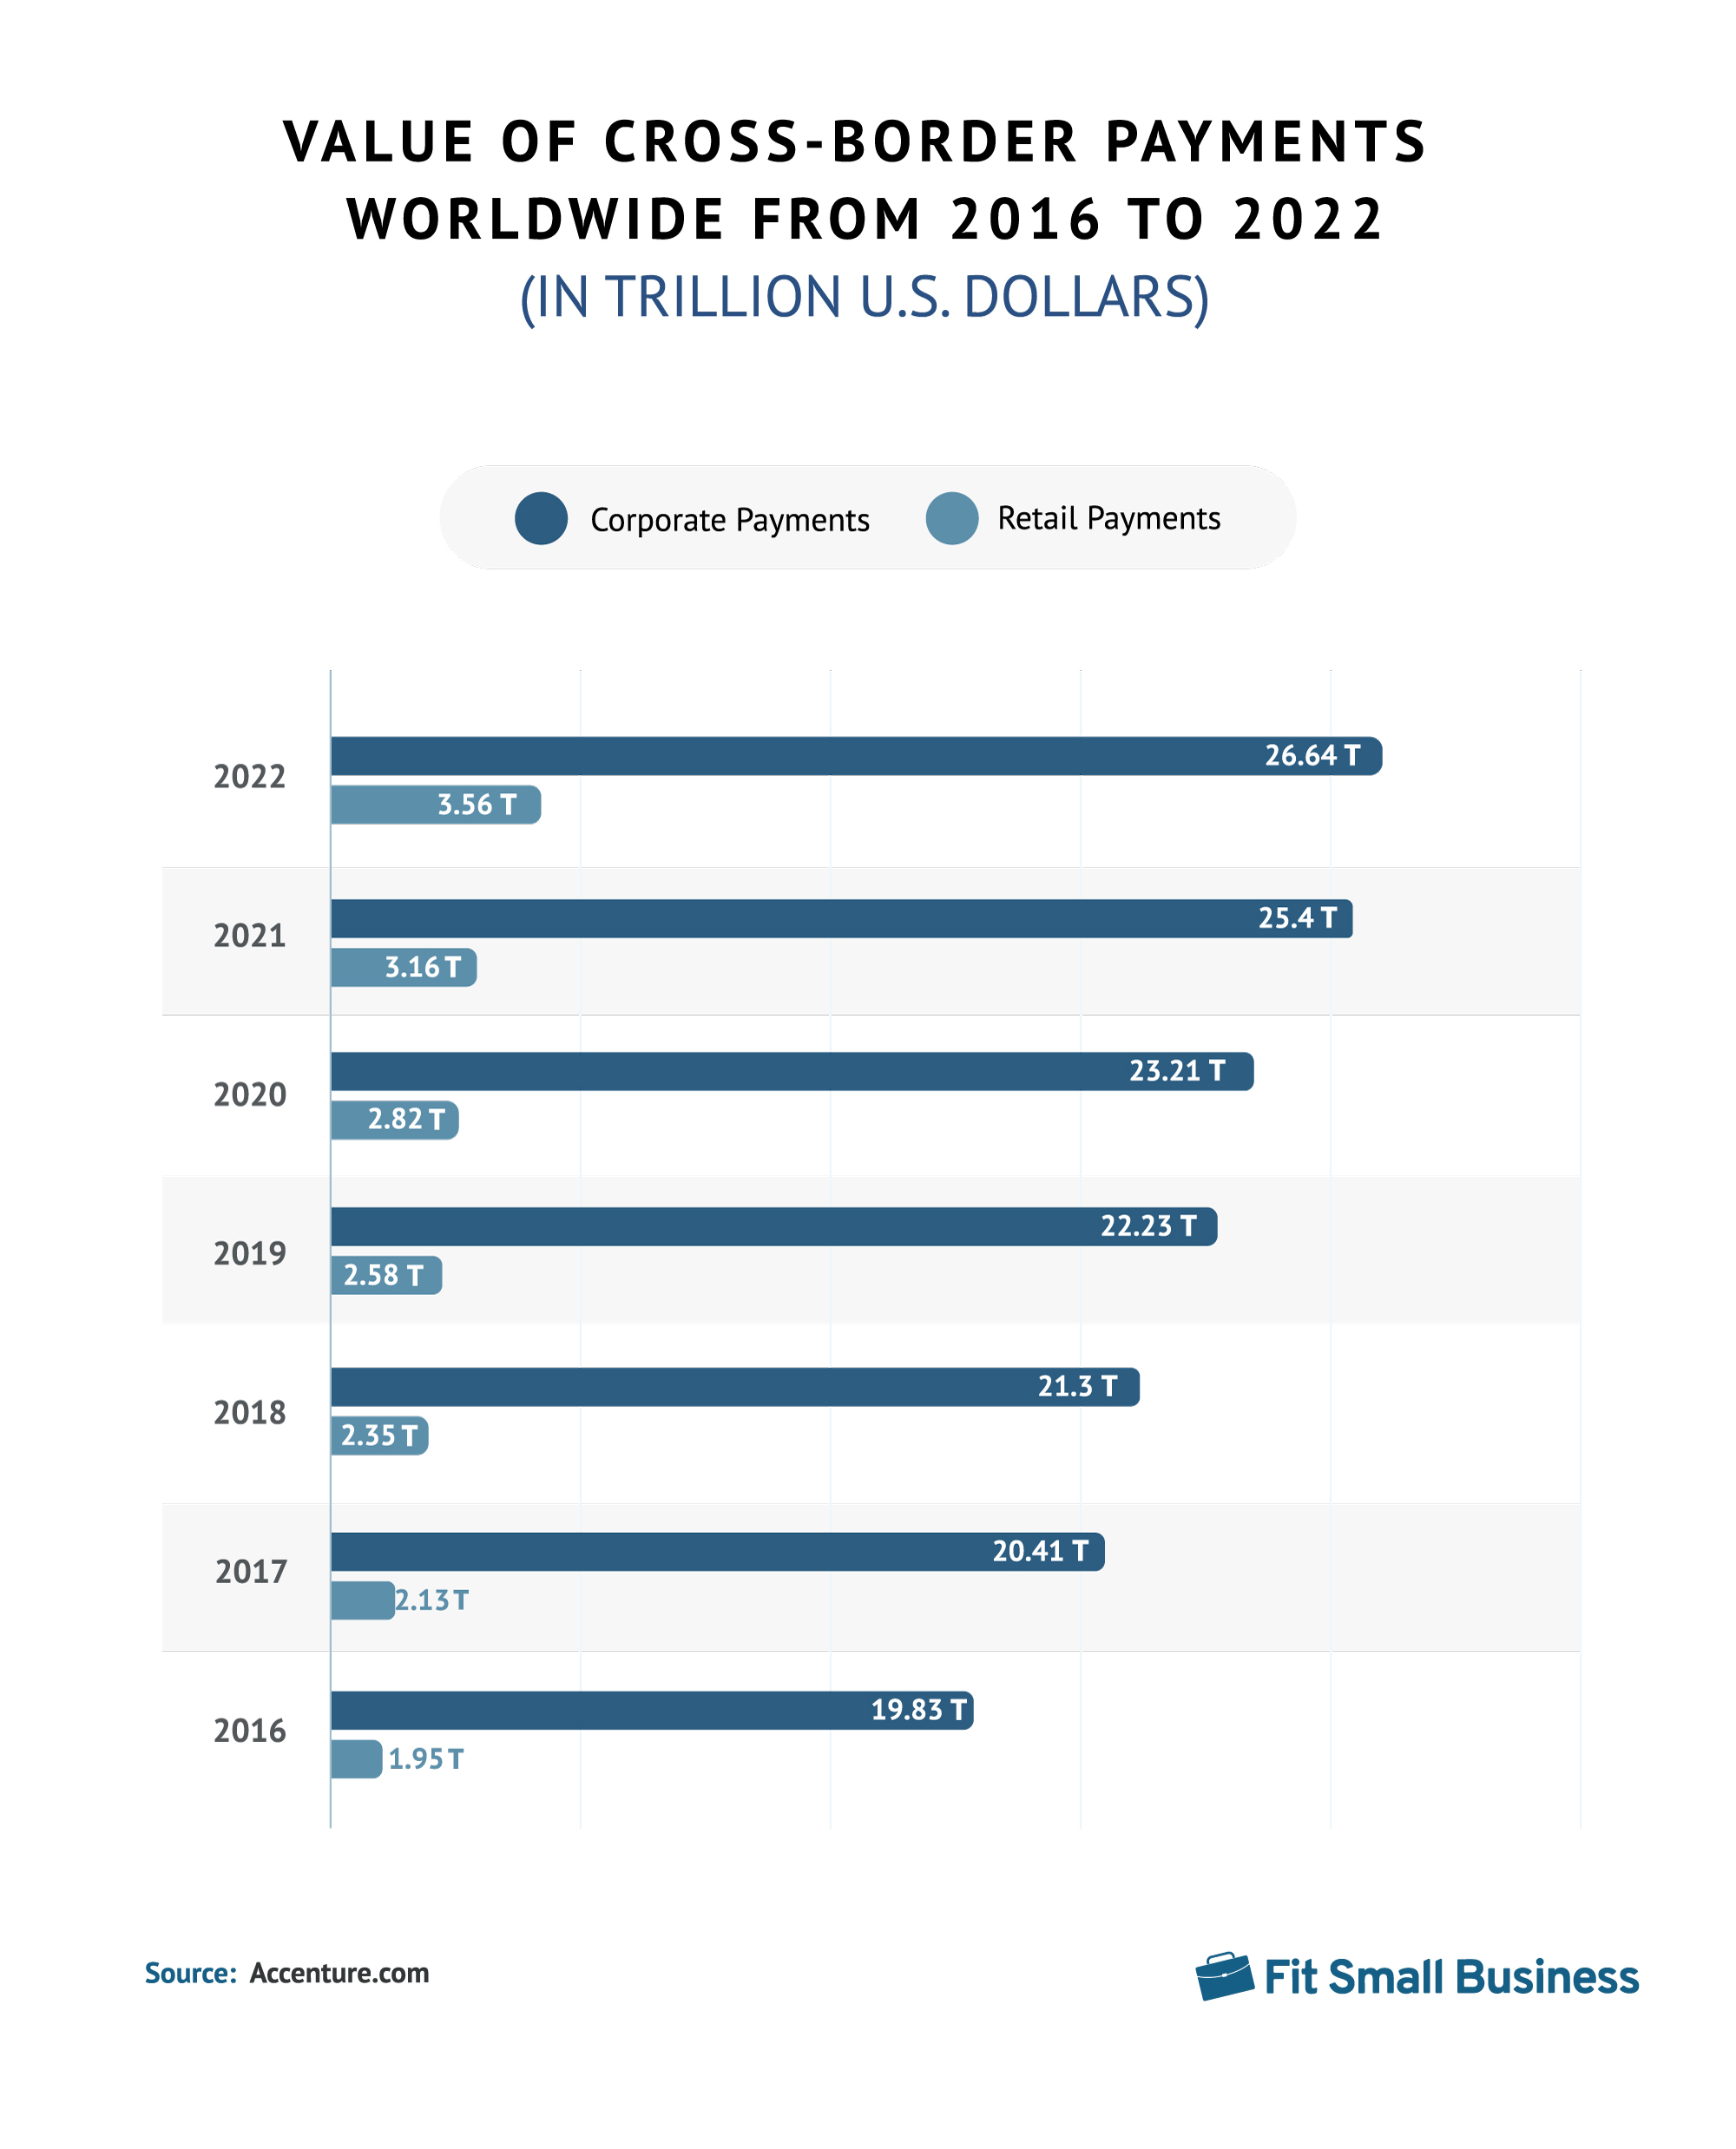 Value of Cross-border payments worldwide from 2016 to 2022.